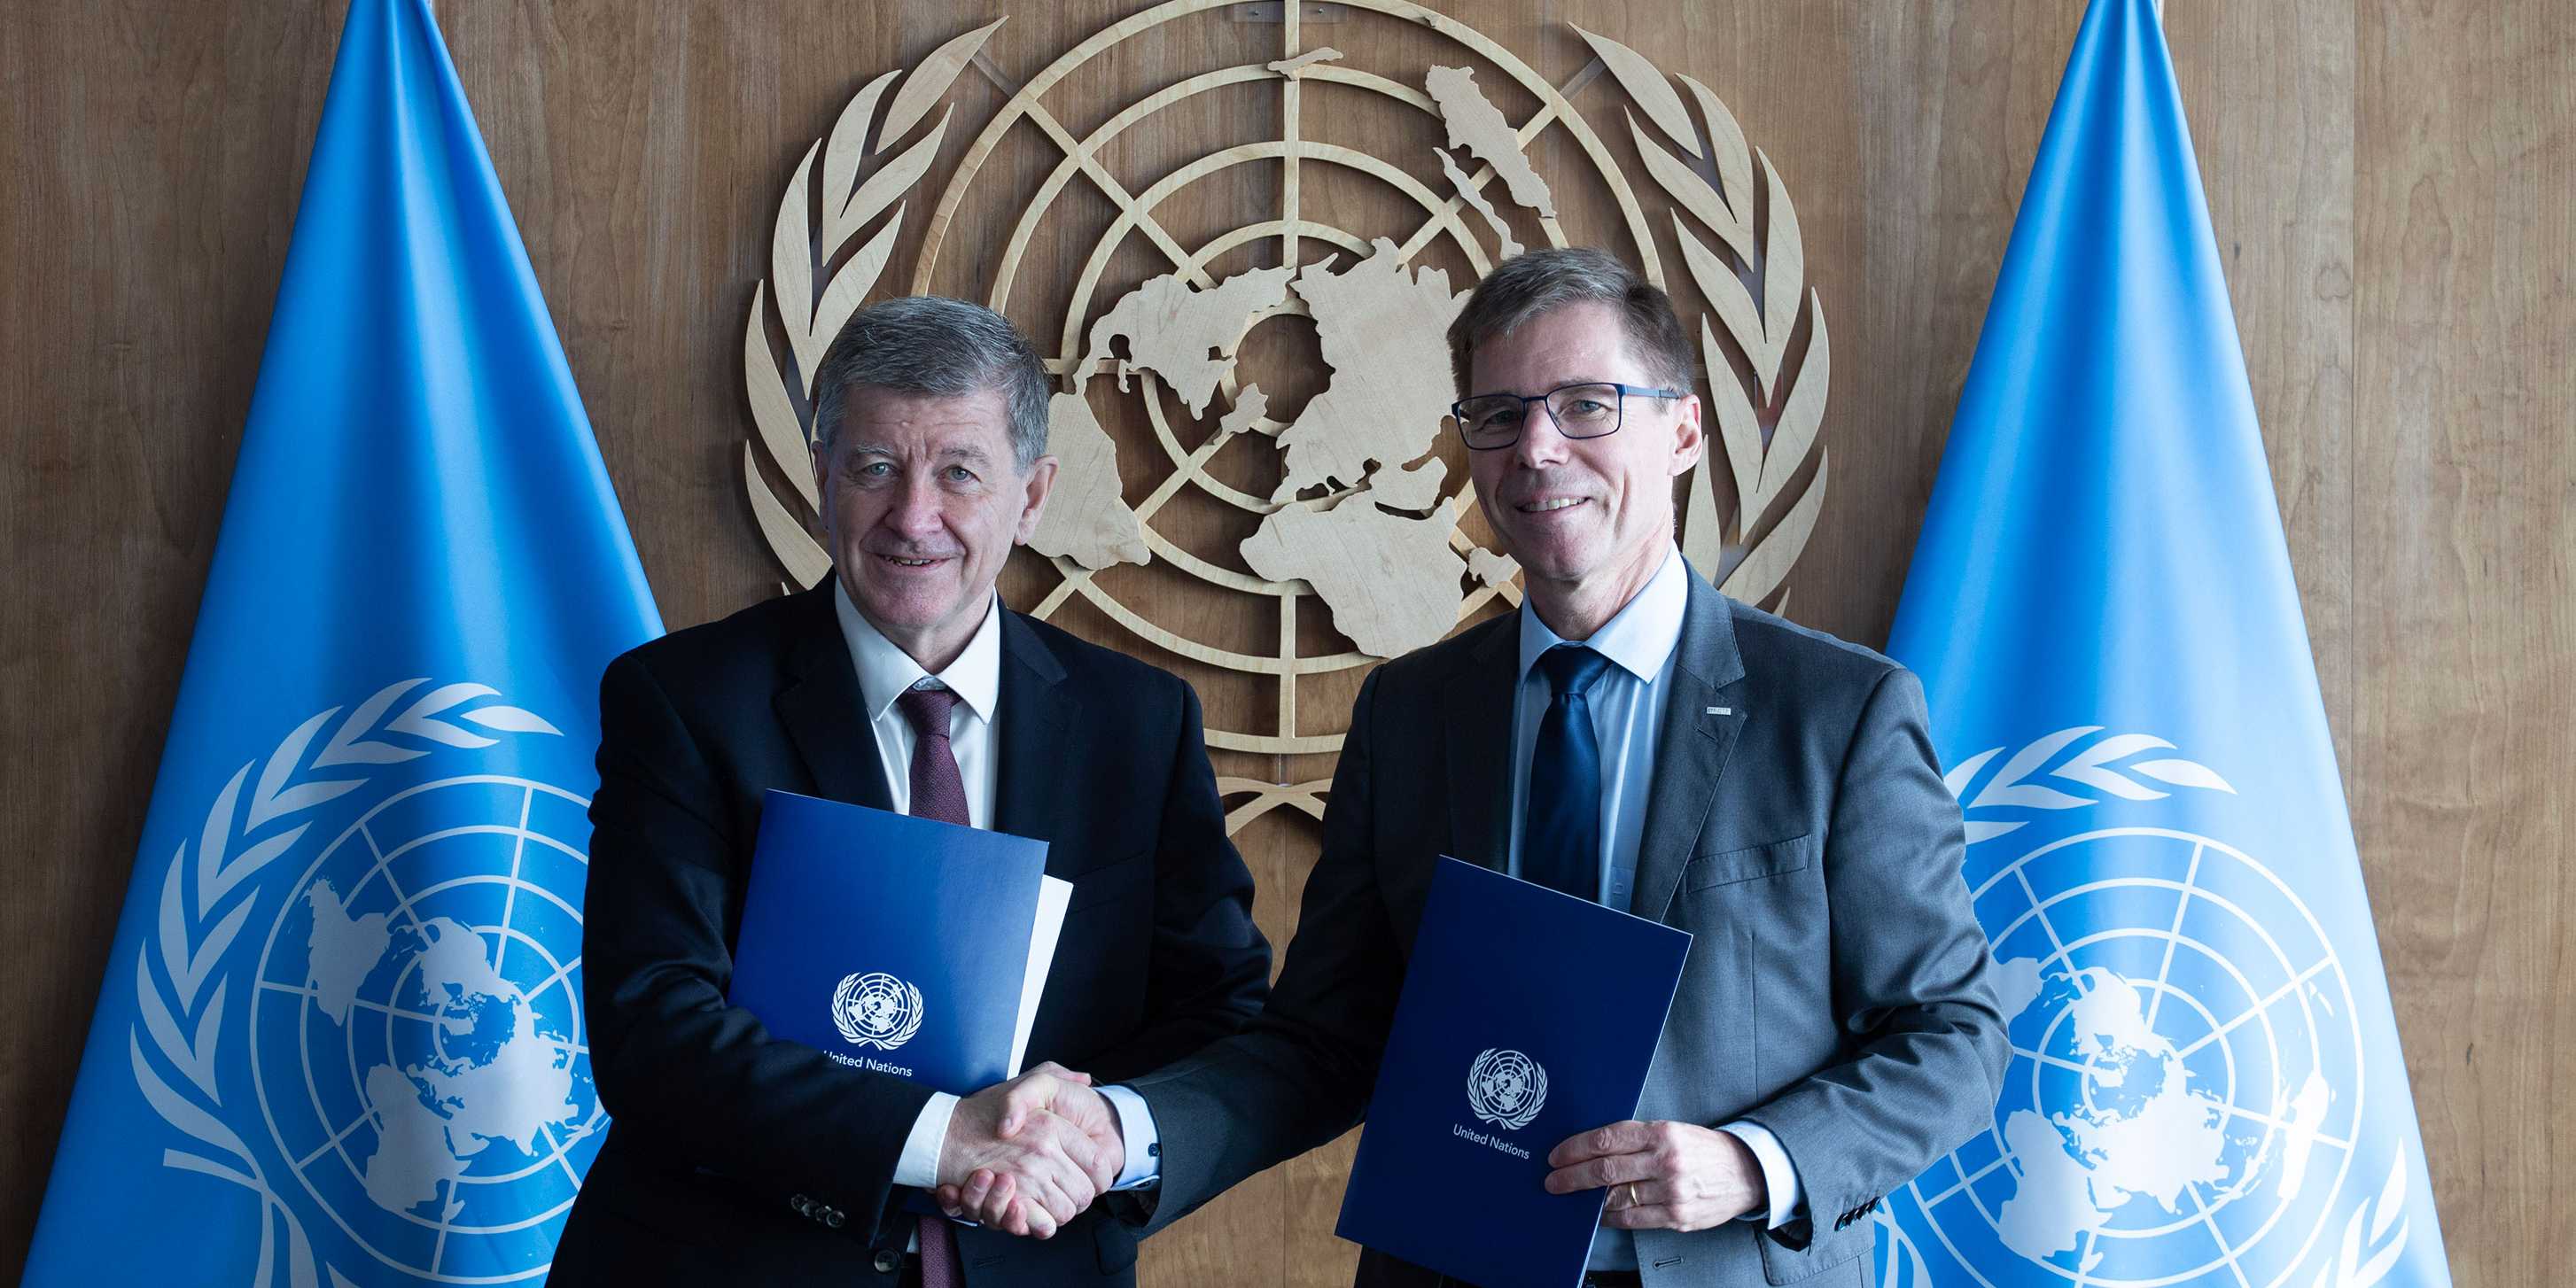 Guy Ryder, on the left, and Joël Mesot shake hands. They are each holding a blue folder with the UN emblem in the background.